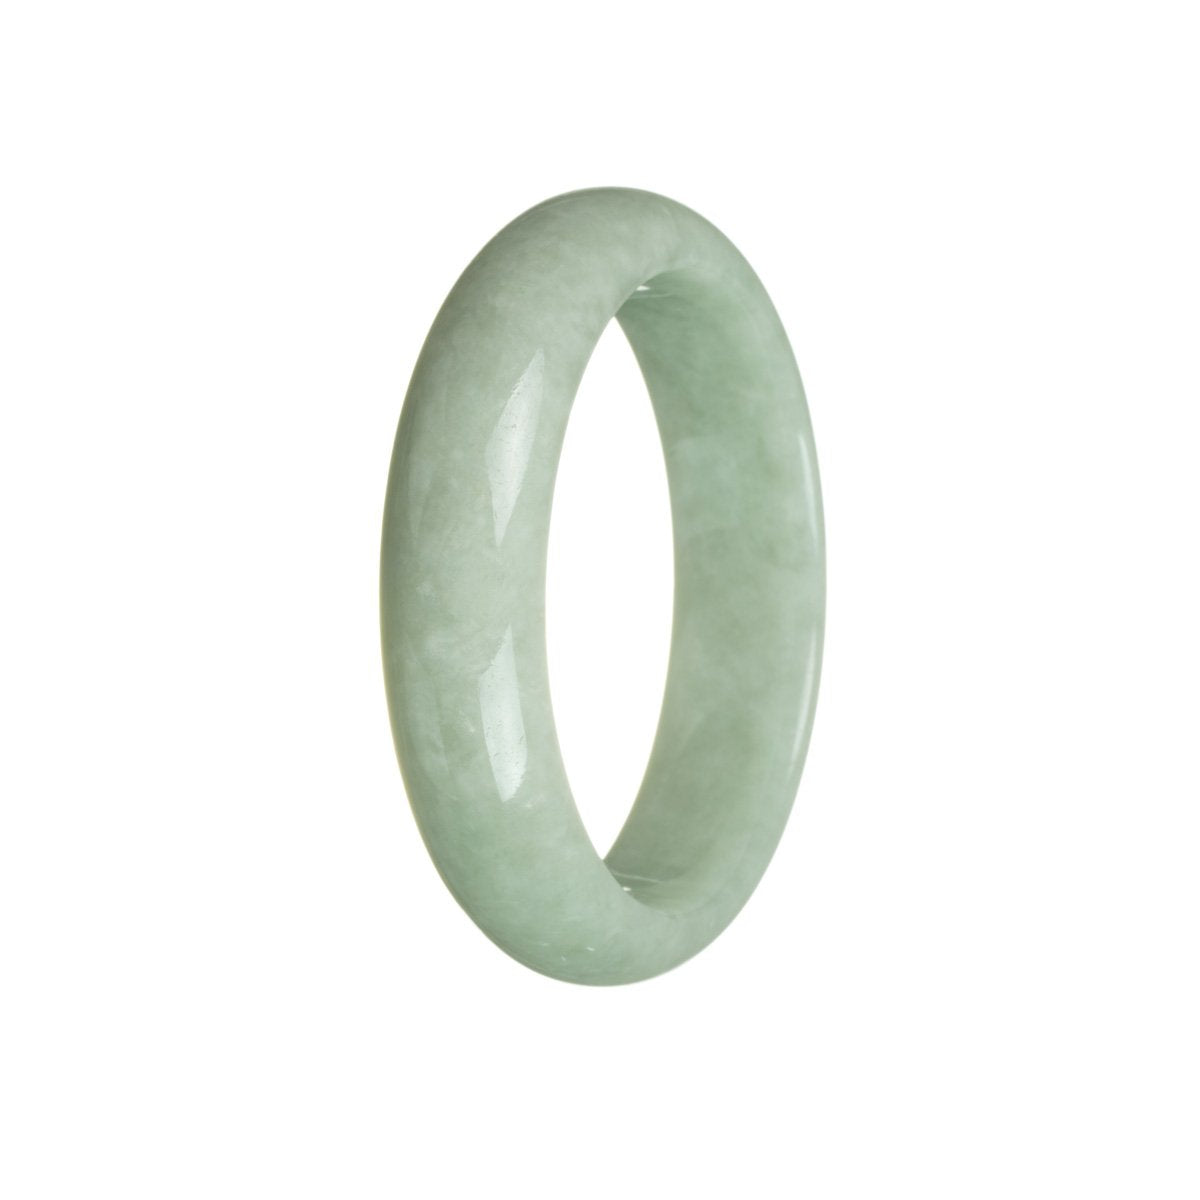 A half-moon-shaped Genuine Natural Green Burmese Jade Bangle, measuring 58mm in diameter, offered by MAYS GEMS.